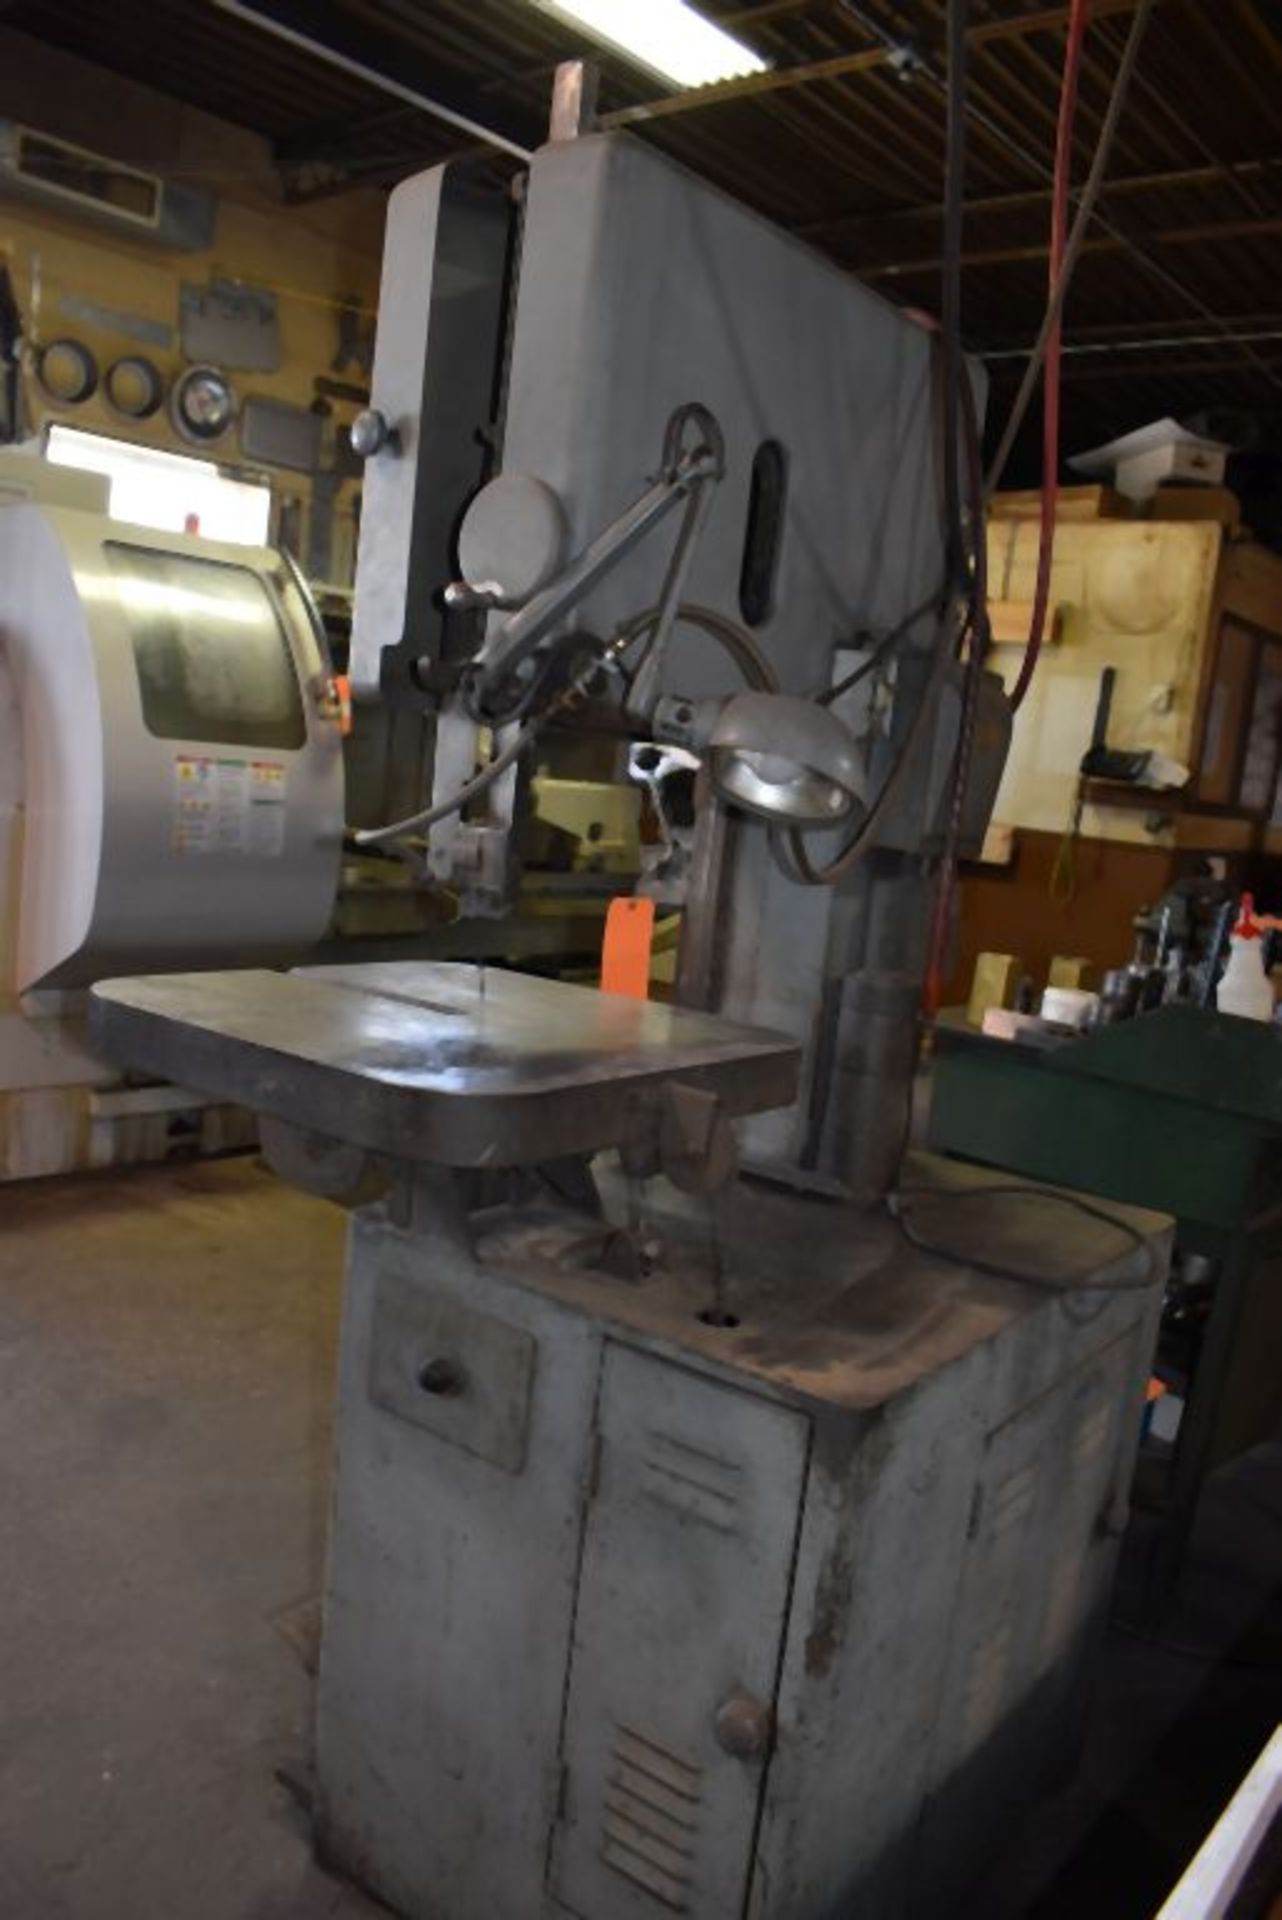 GROB 18" VERTICAL BAND SAW, MODEL NS18, S/N: 10349, DUST BLOWER, TILTING TABLE, FOOT BRAKE, BLADE - Image 2 of 3